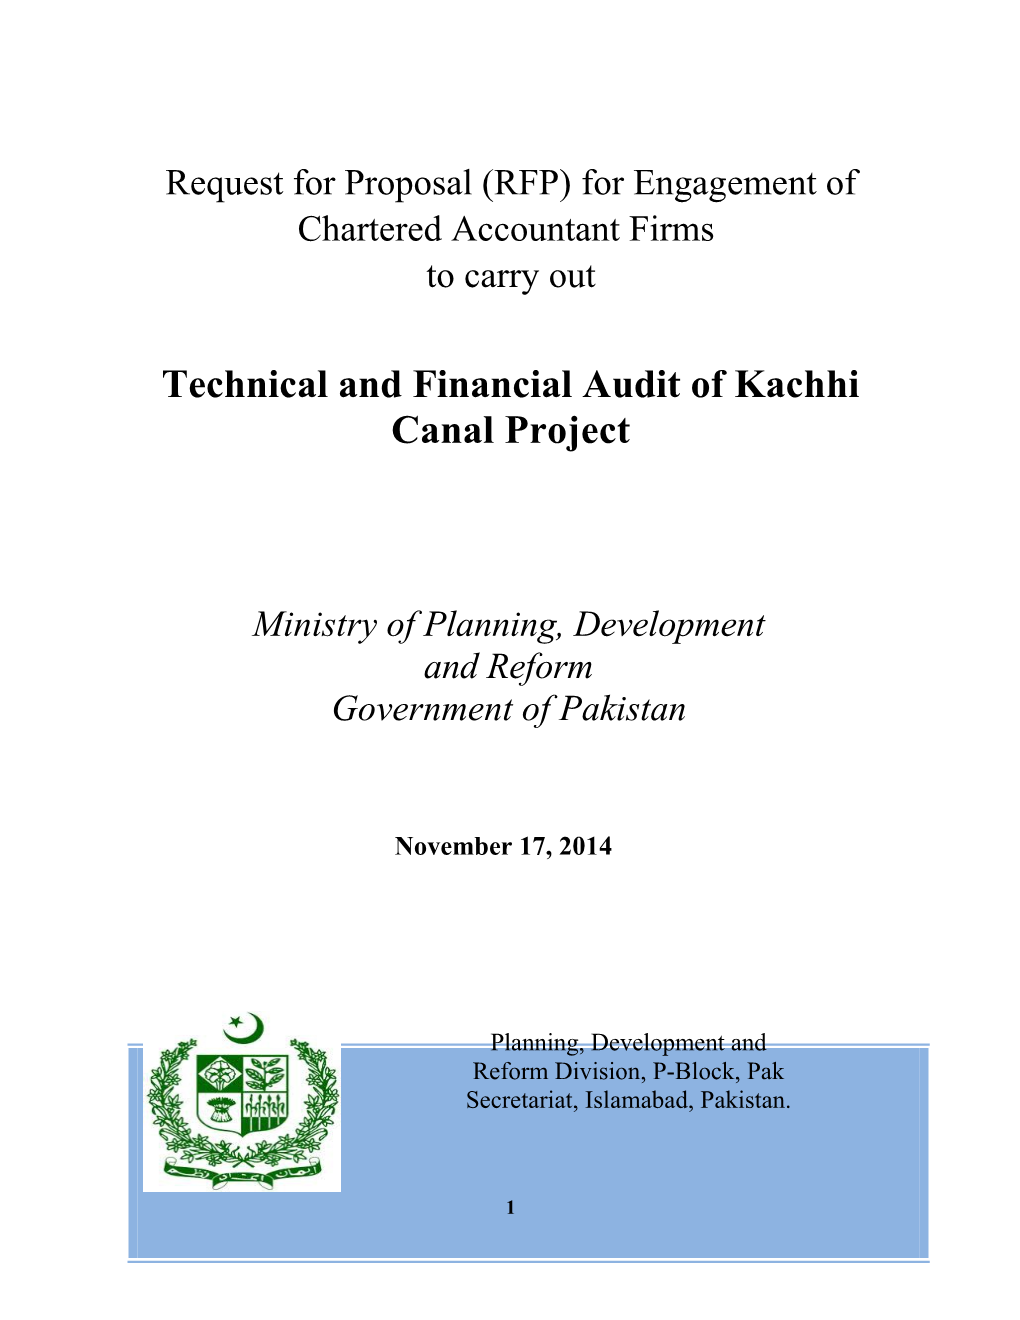 Technical and Financial Audit of Kachhi Canal Project